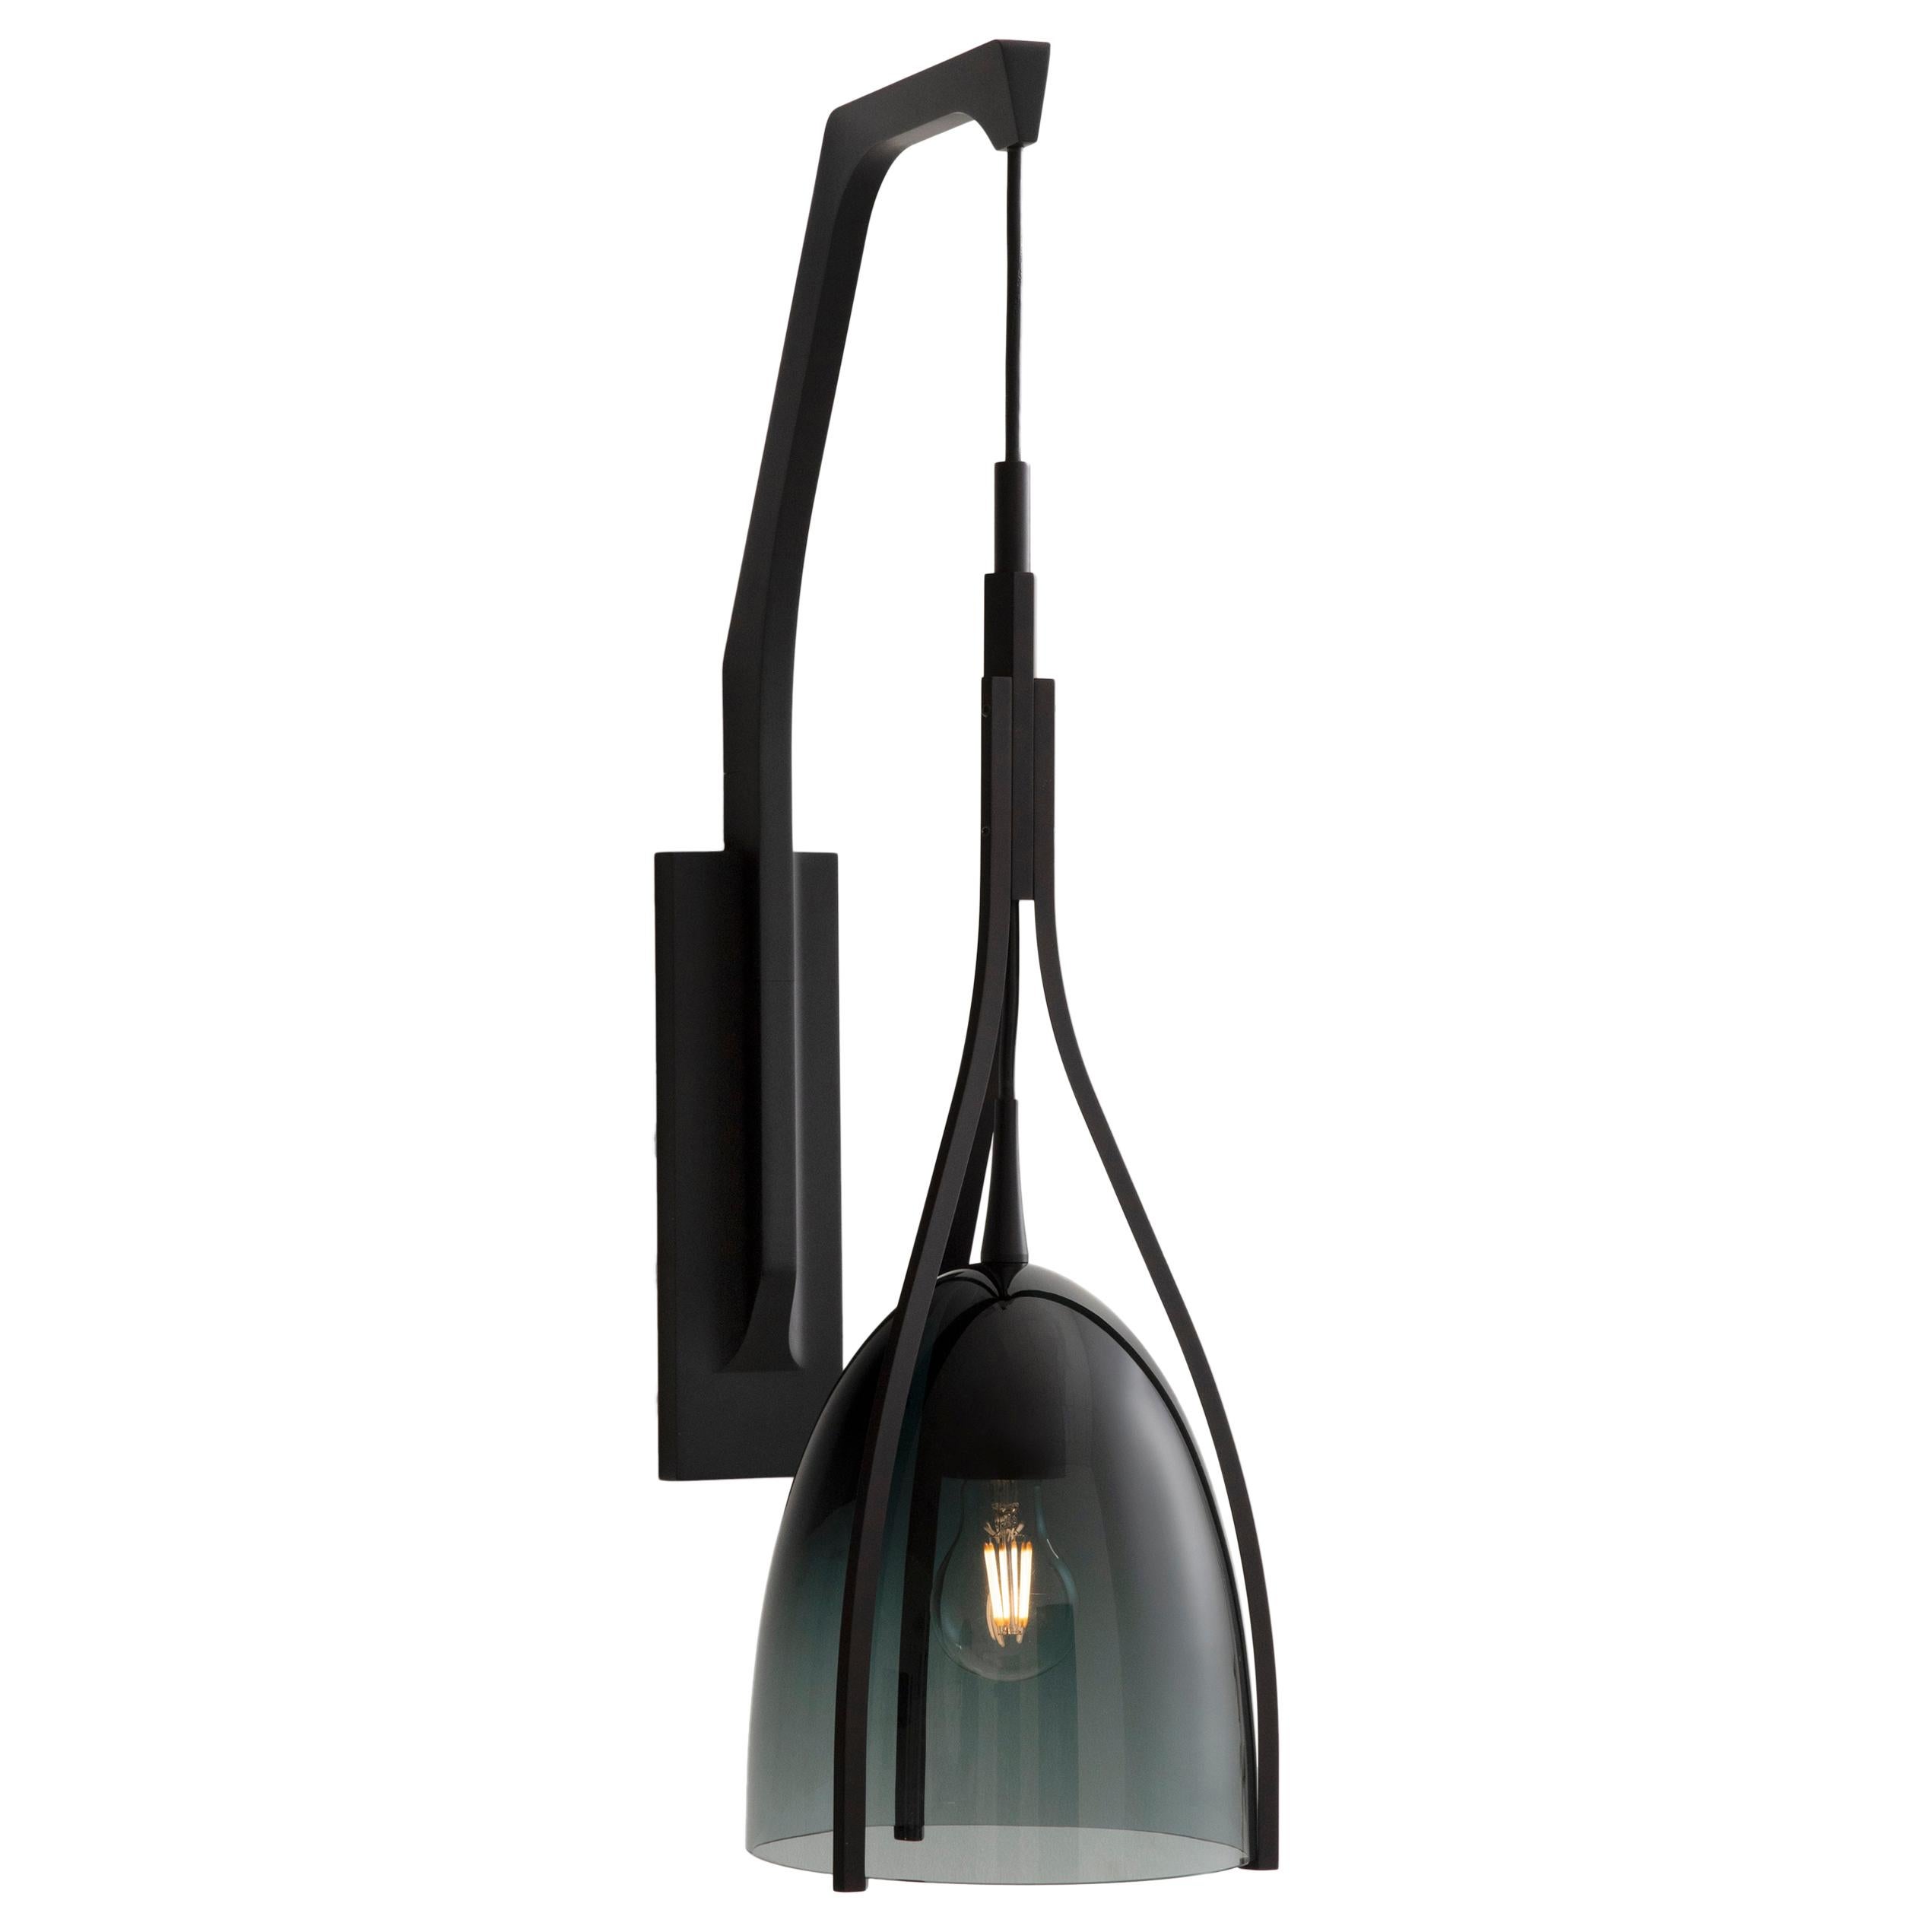 HOLLY HUNT Black Cat Wall Sconce in Anodized Aluminum Frame and Glass Shade